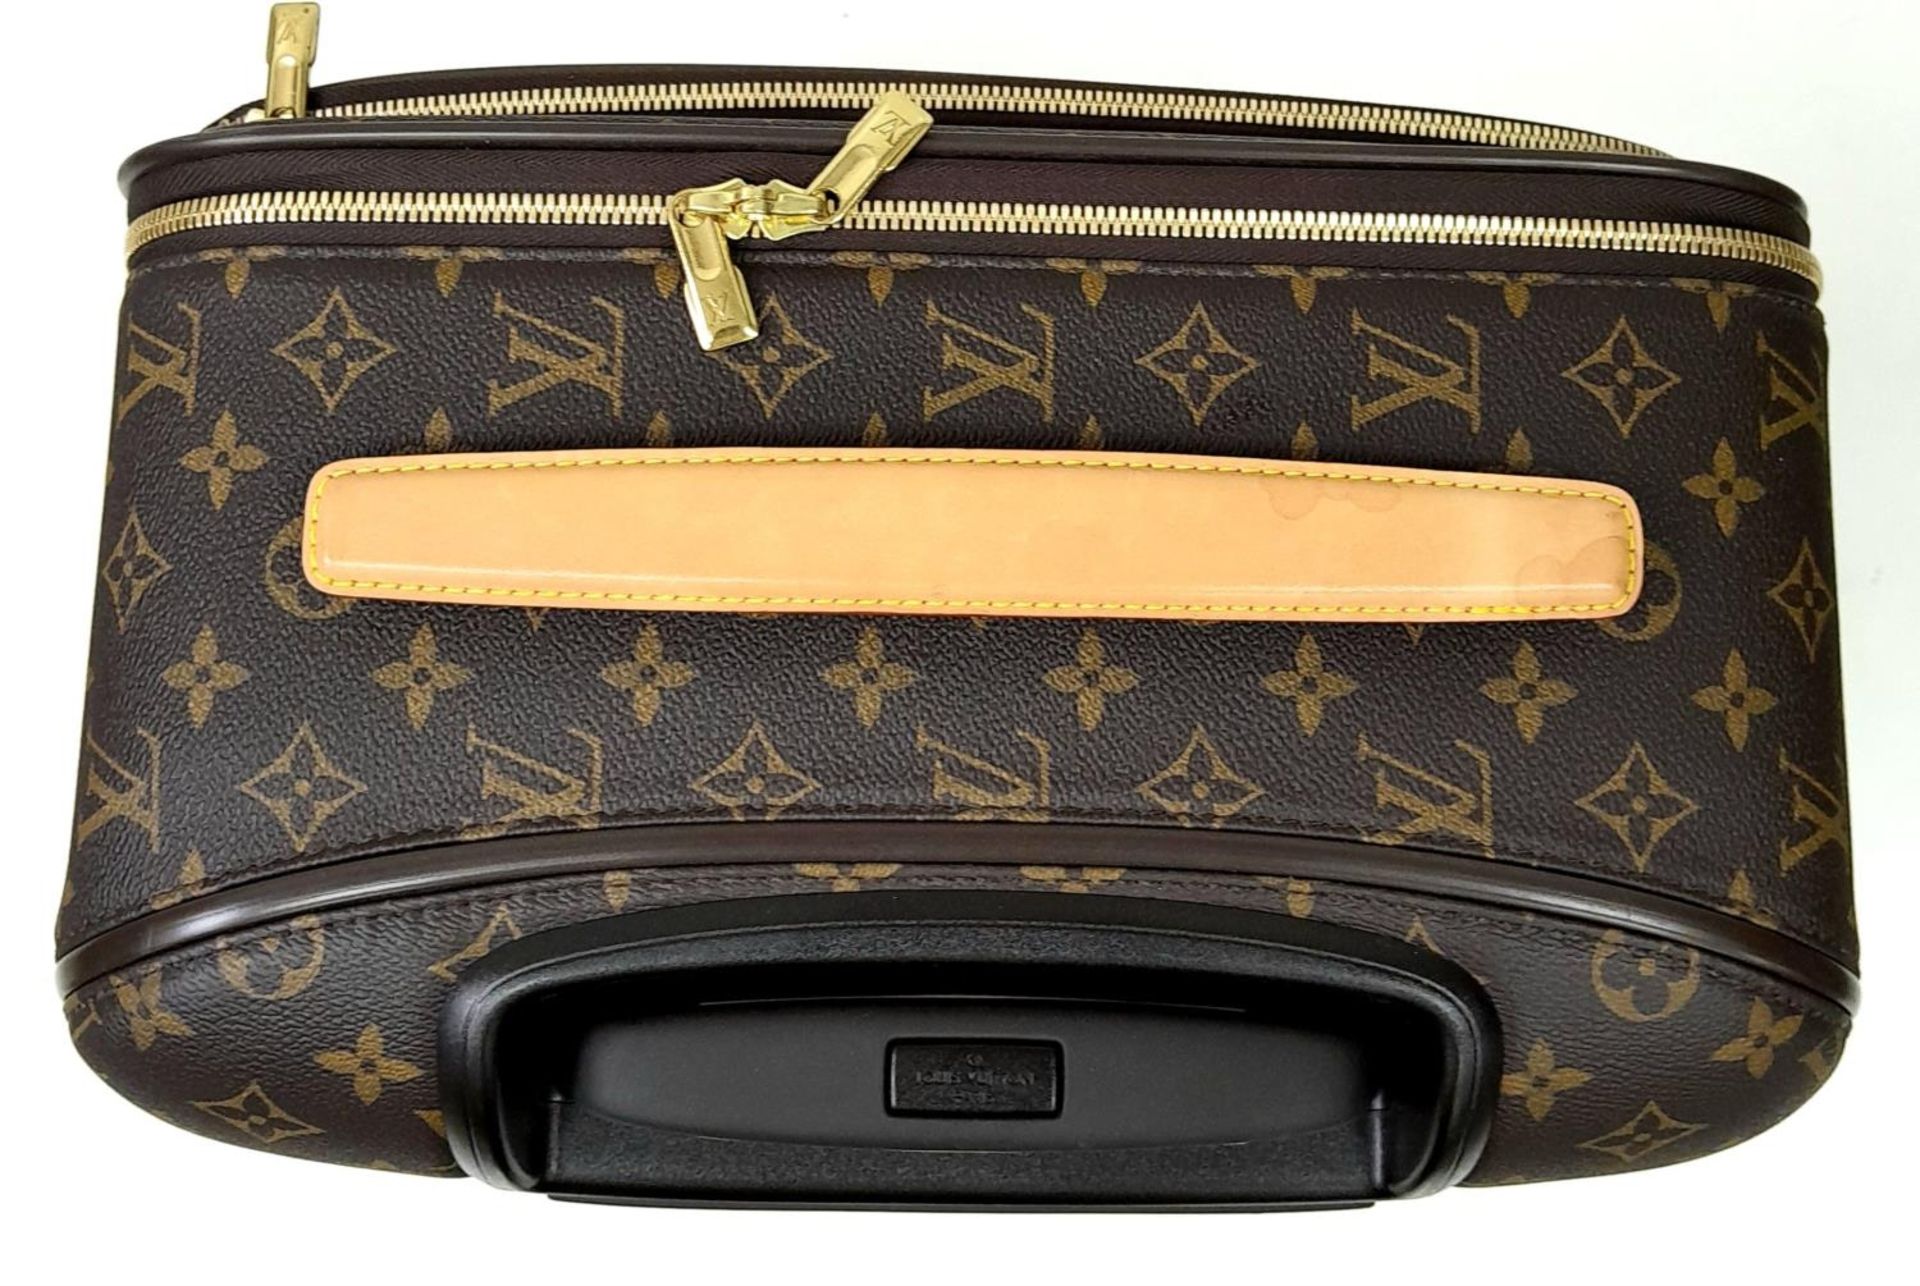 A Louis Vuitton Monogram Pegase Suitcase. Durable leather exterior with gold-toned hardware. Front - Image 4 of 16